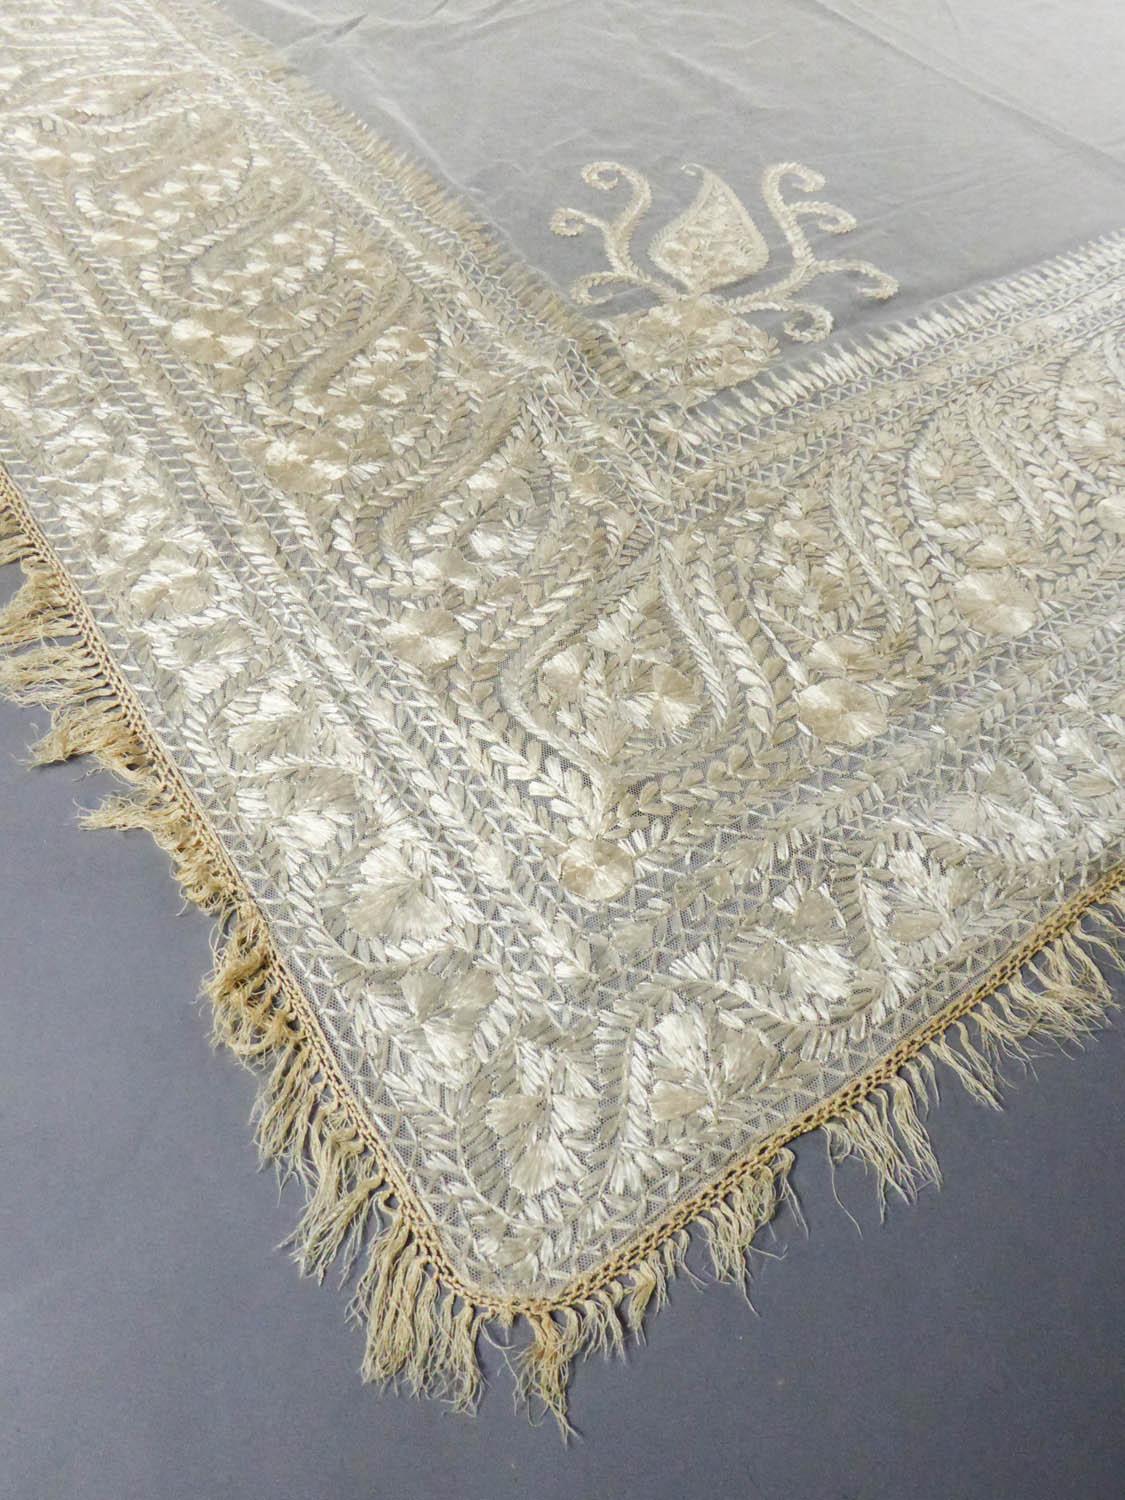 Women's Turn-over shawl in Silk embroidered on Cotton Net - Circa 1840